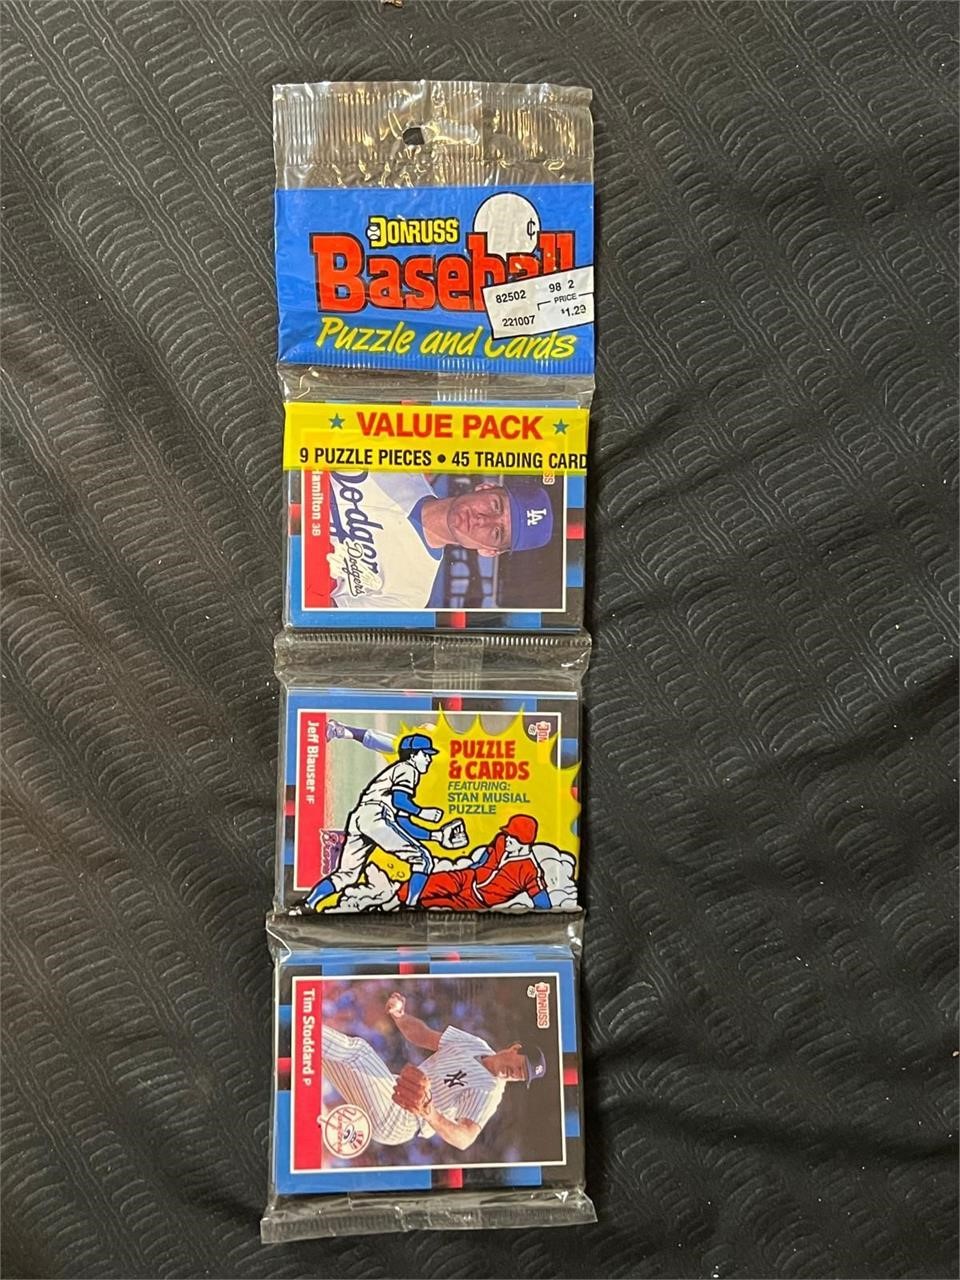 Donruss Baseball Puzzle and Cards   UNOPENED